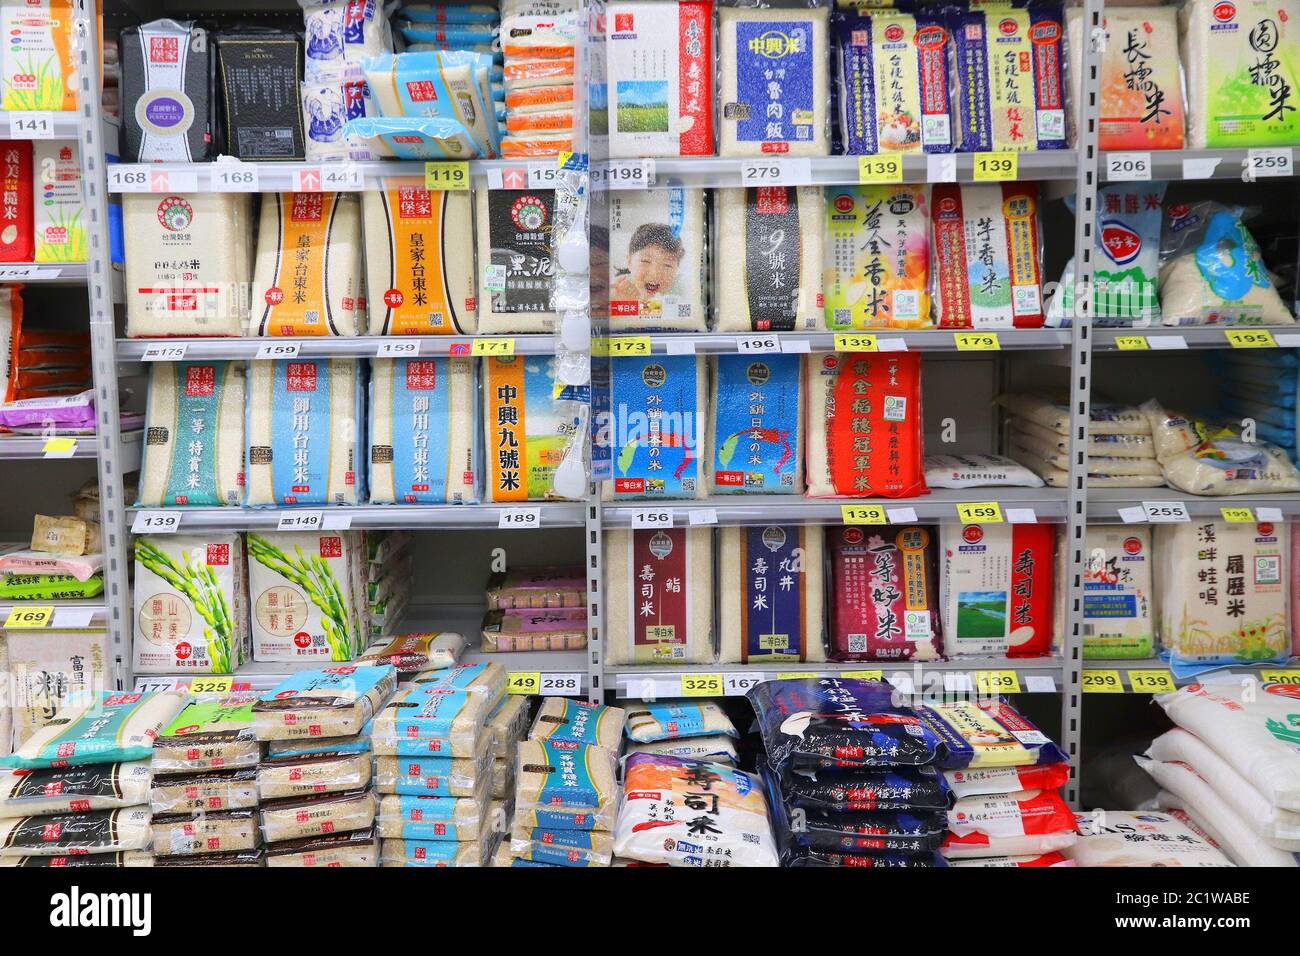 TAIPEI, TAIWAN - DECEMBER 3, 2018: Rice varieties in a supermarket in Taipei, Taiwan. Taipei is the most populous city and capital city of Taiwan. Stock Photo